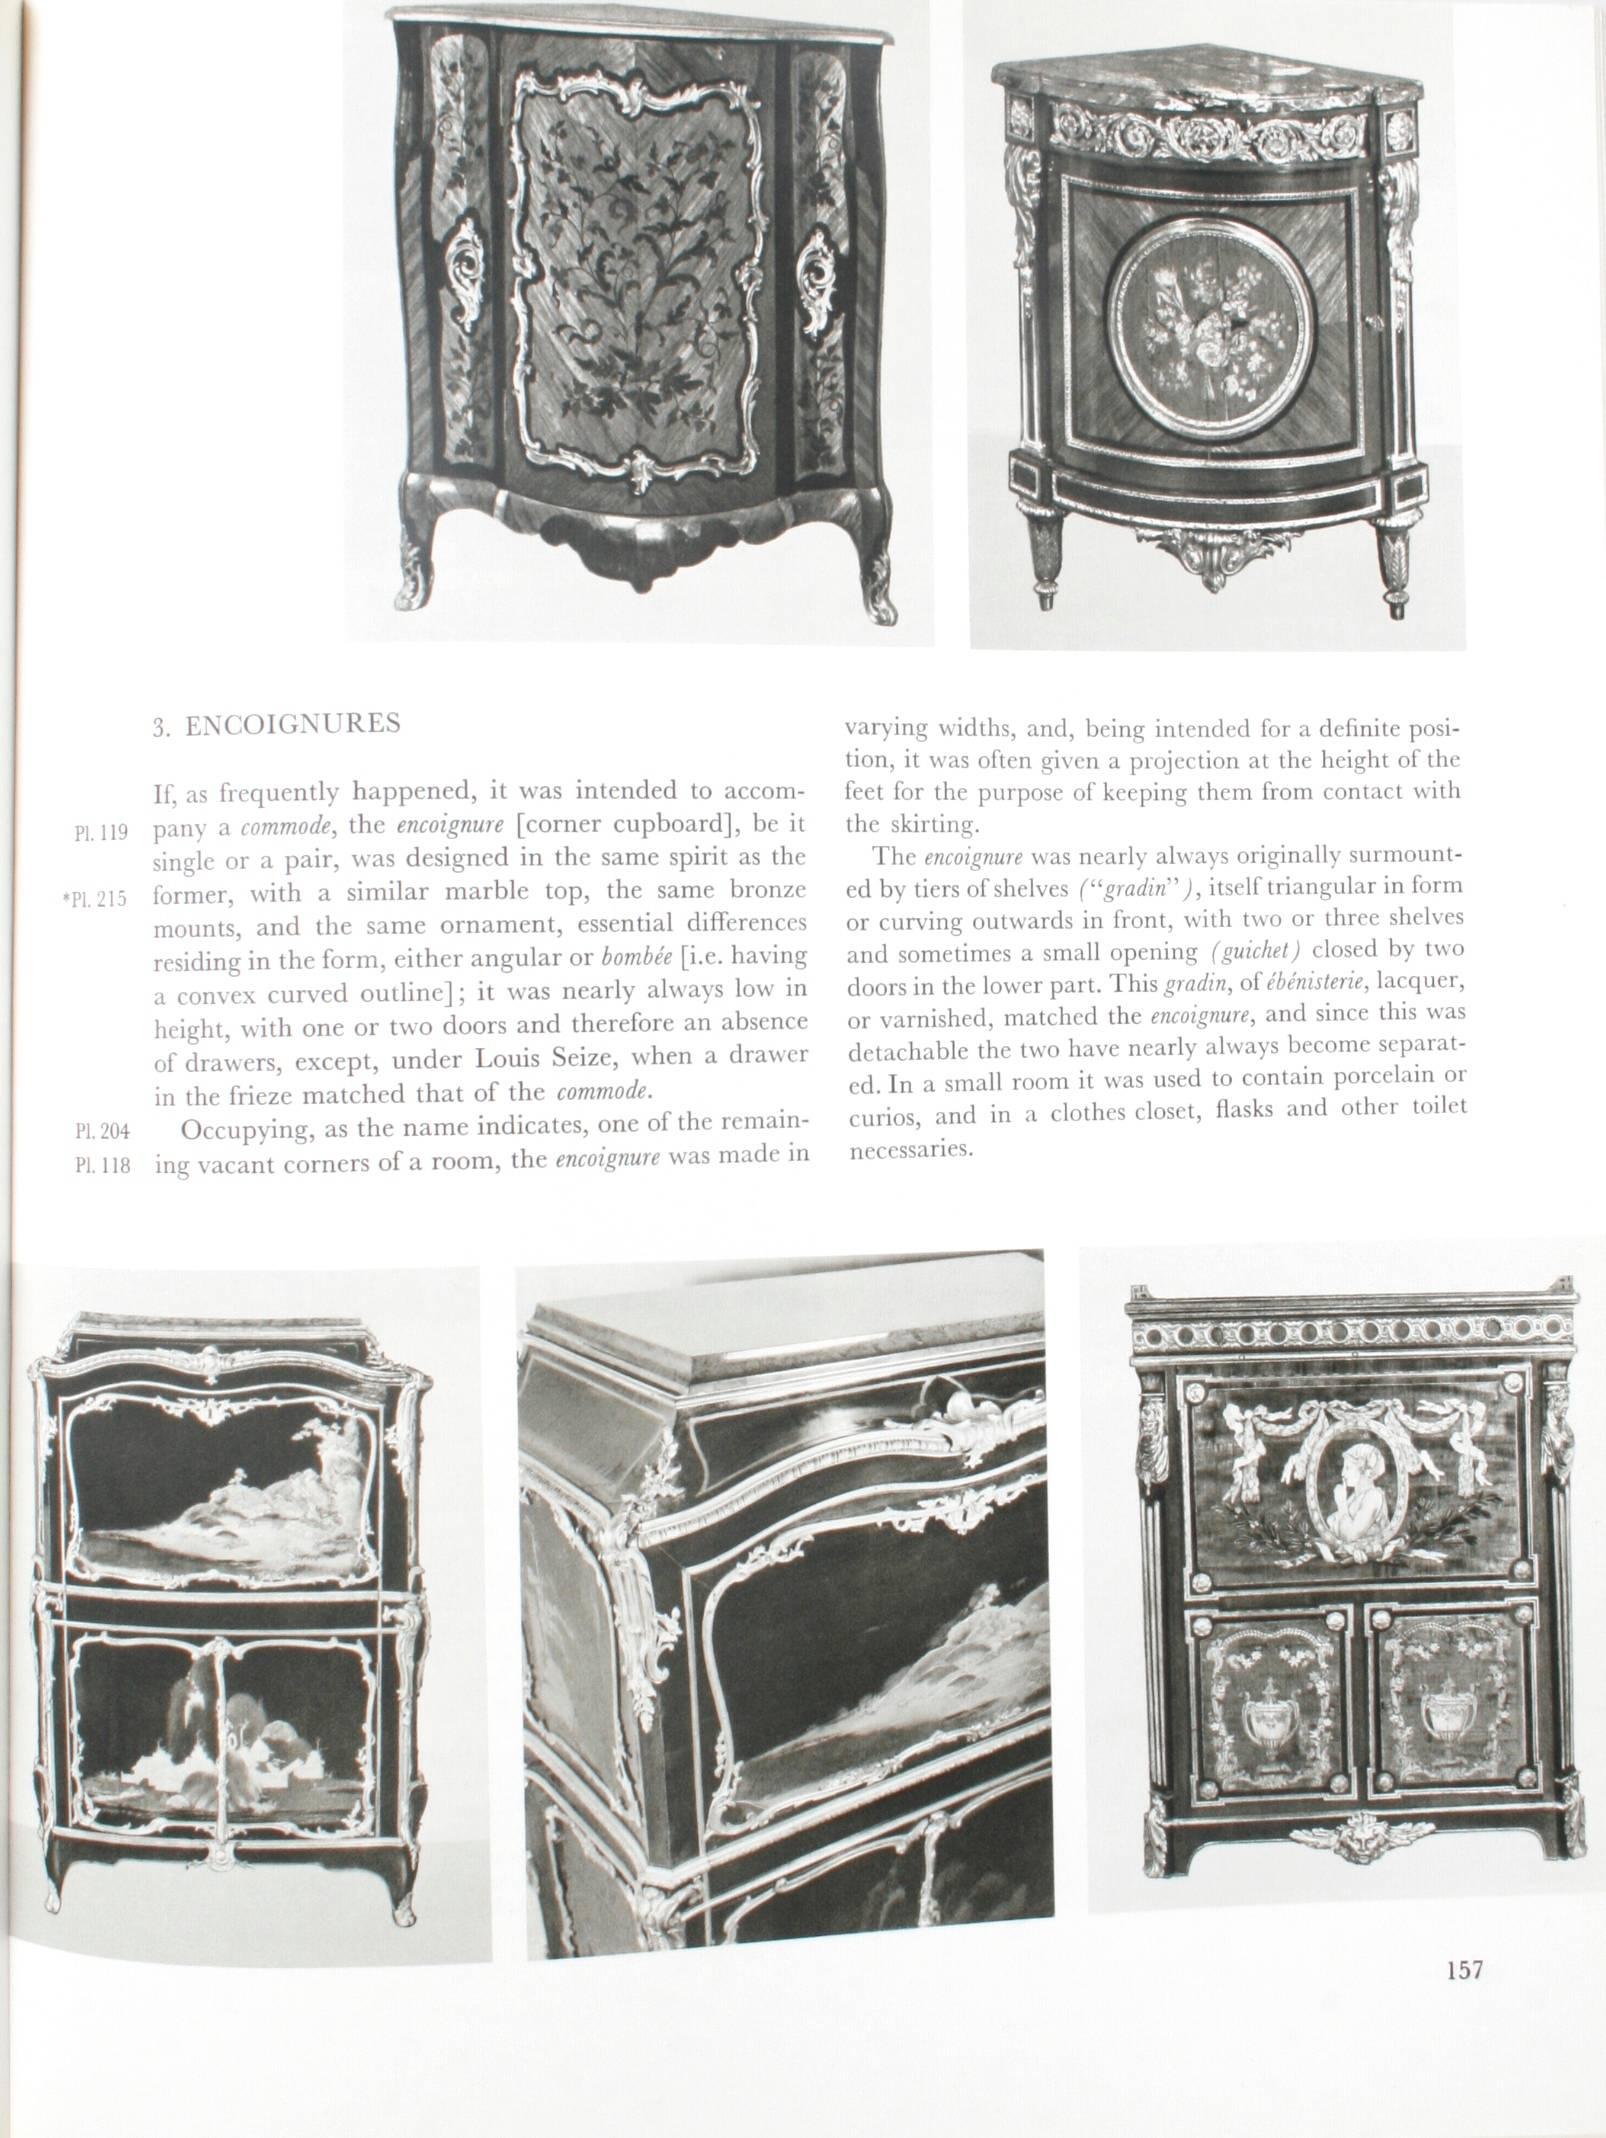 20th Century 18th Century in France: Society, Decoration, Furniture by Pierre Verlet